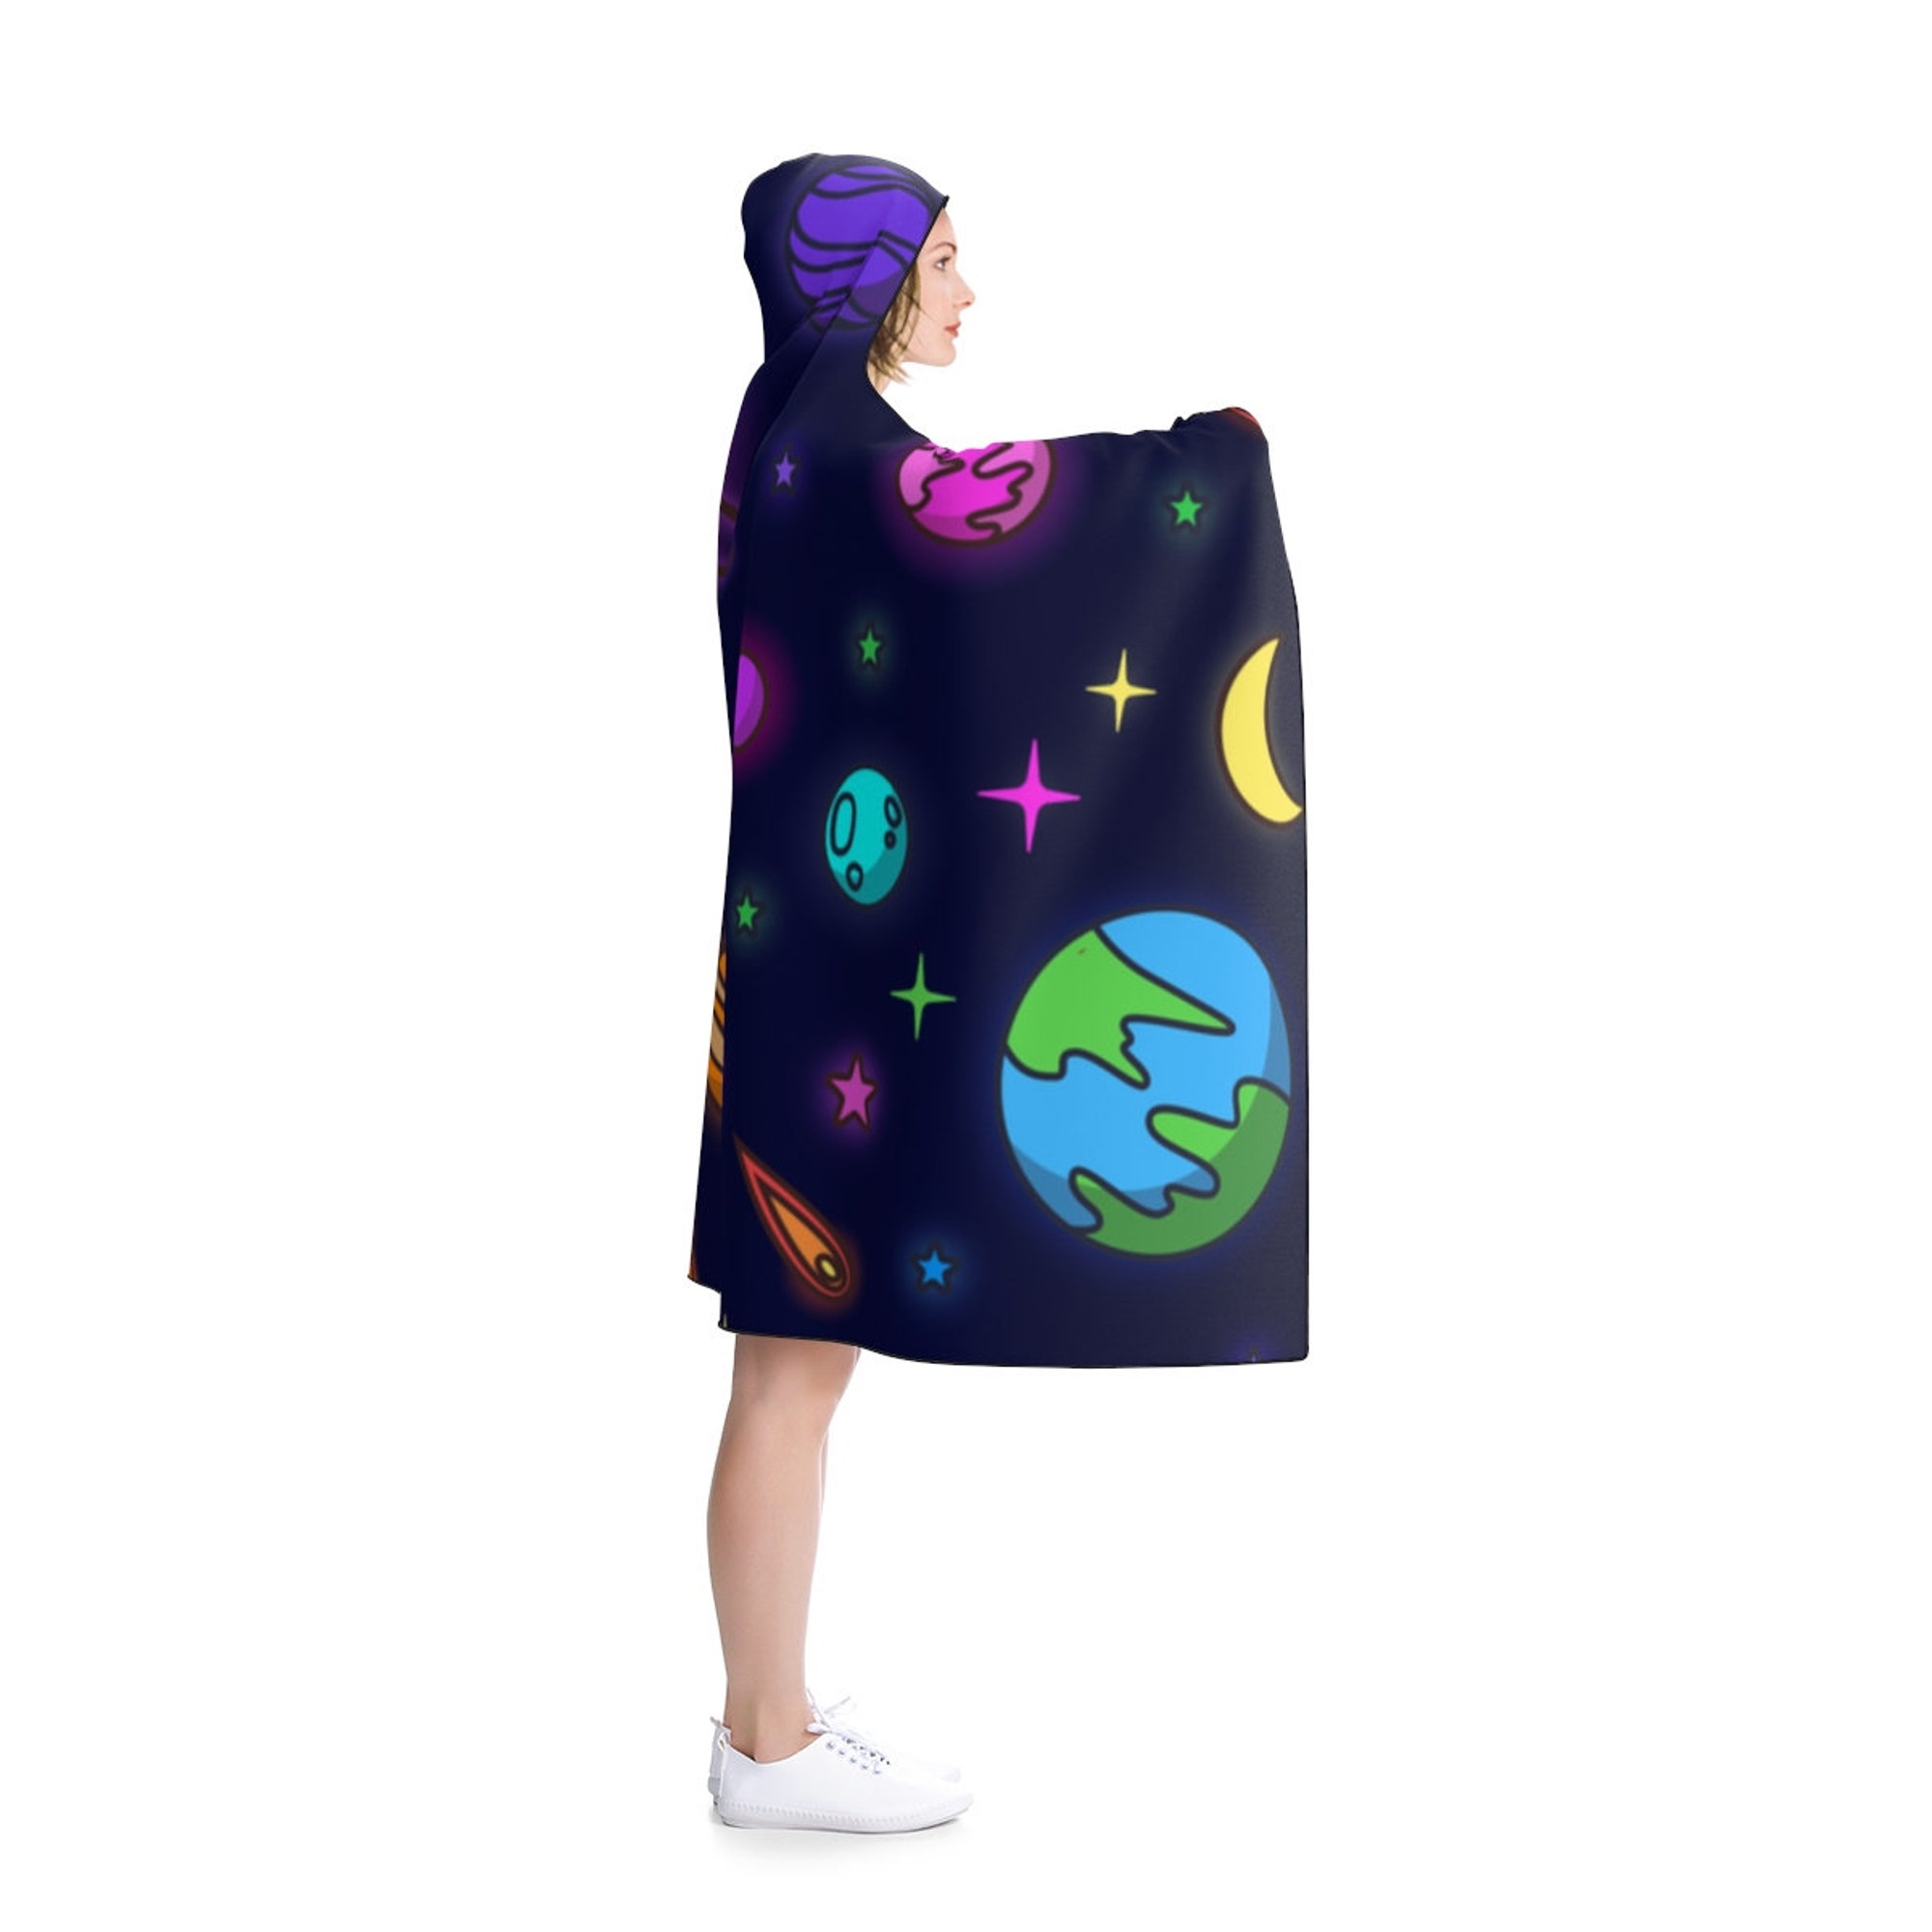 Galaxy Universe Space Stars Hooded Blanket